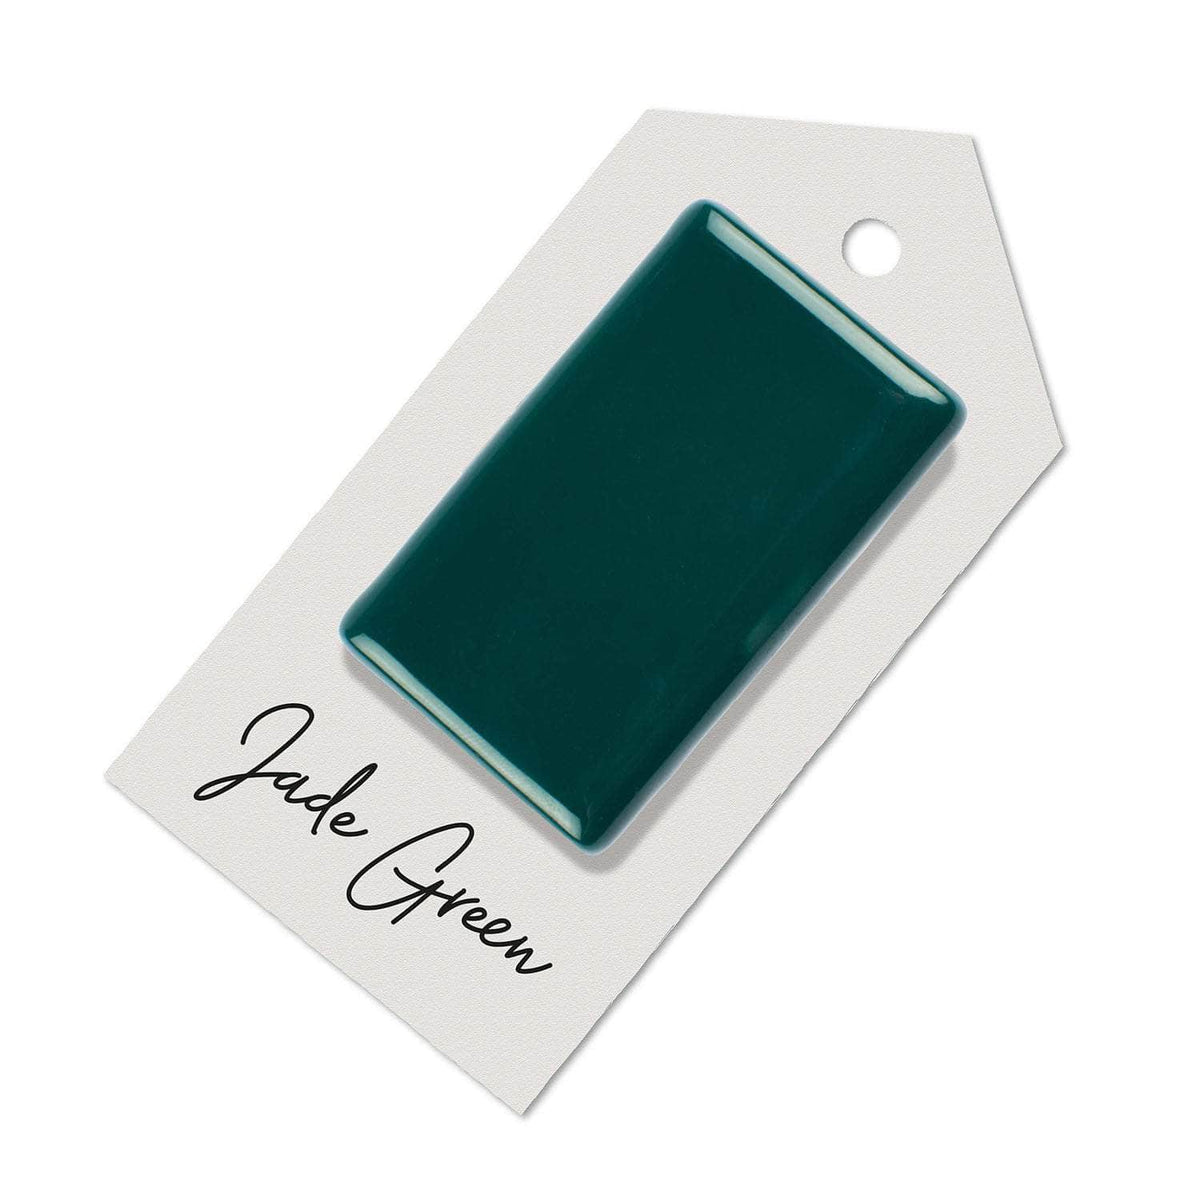 Jade Green sample for Aga range cooker re-enamelling &amp; reconditioned cookers